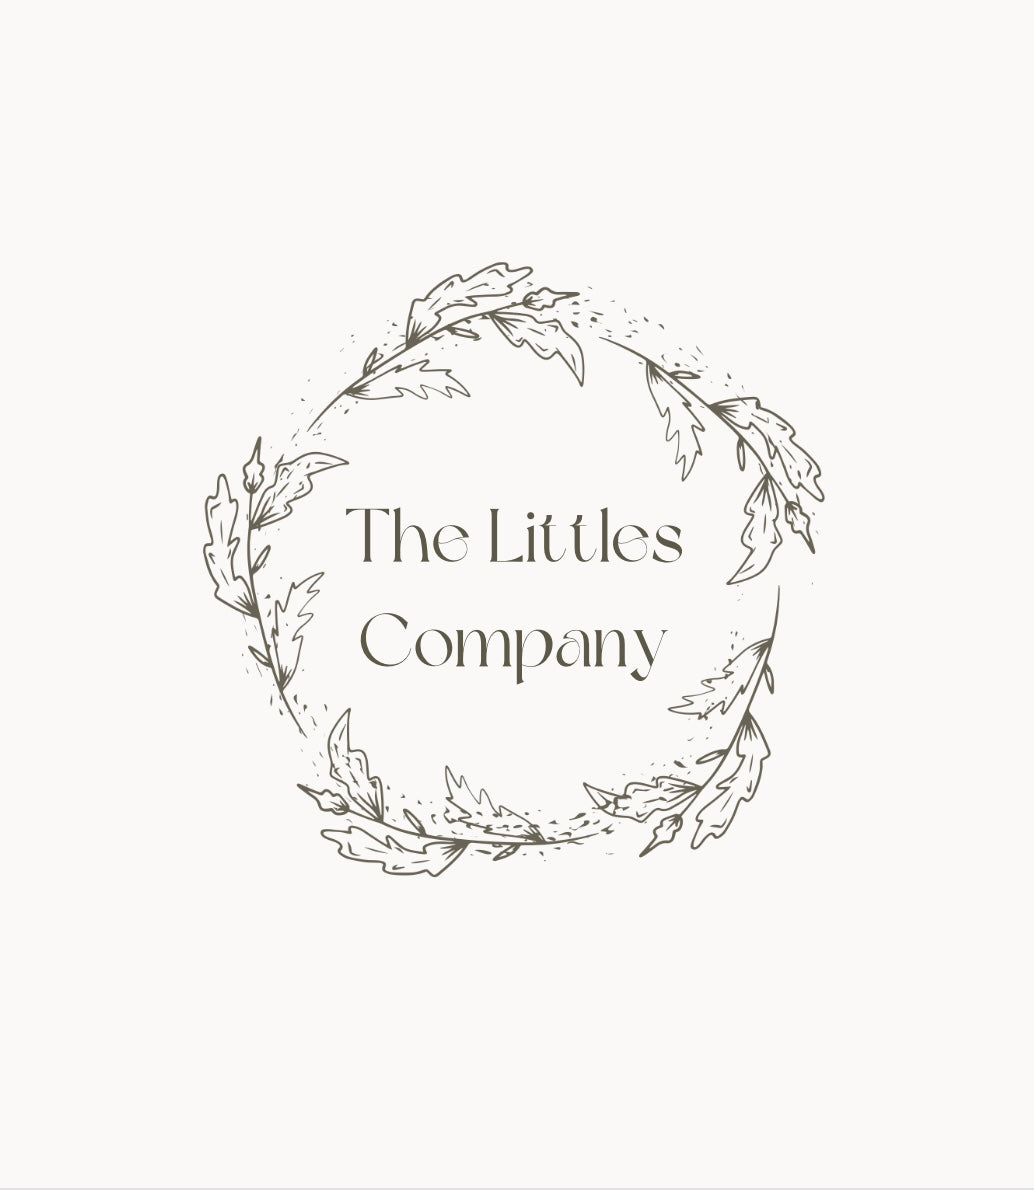 The Littles Company